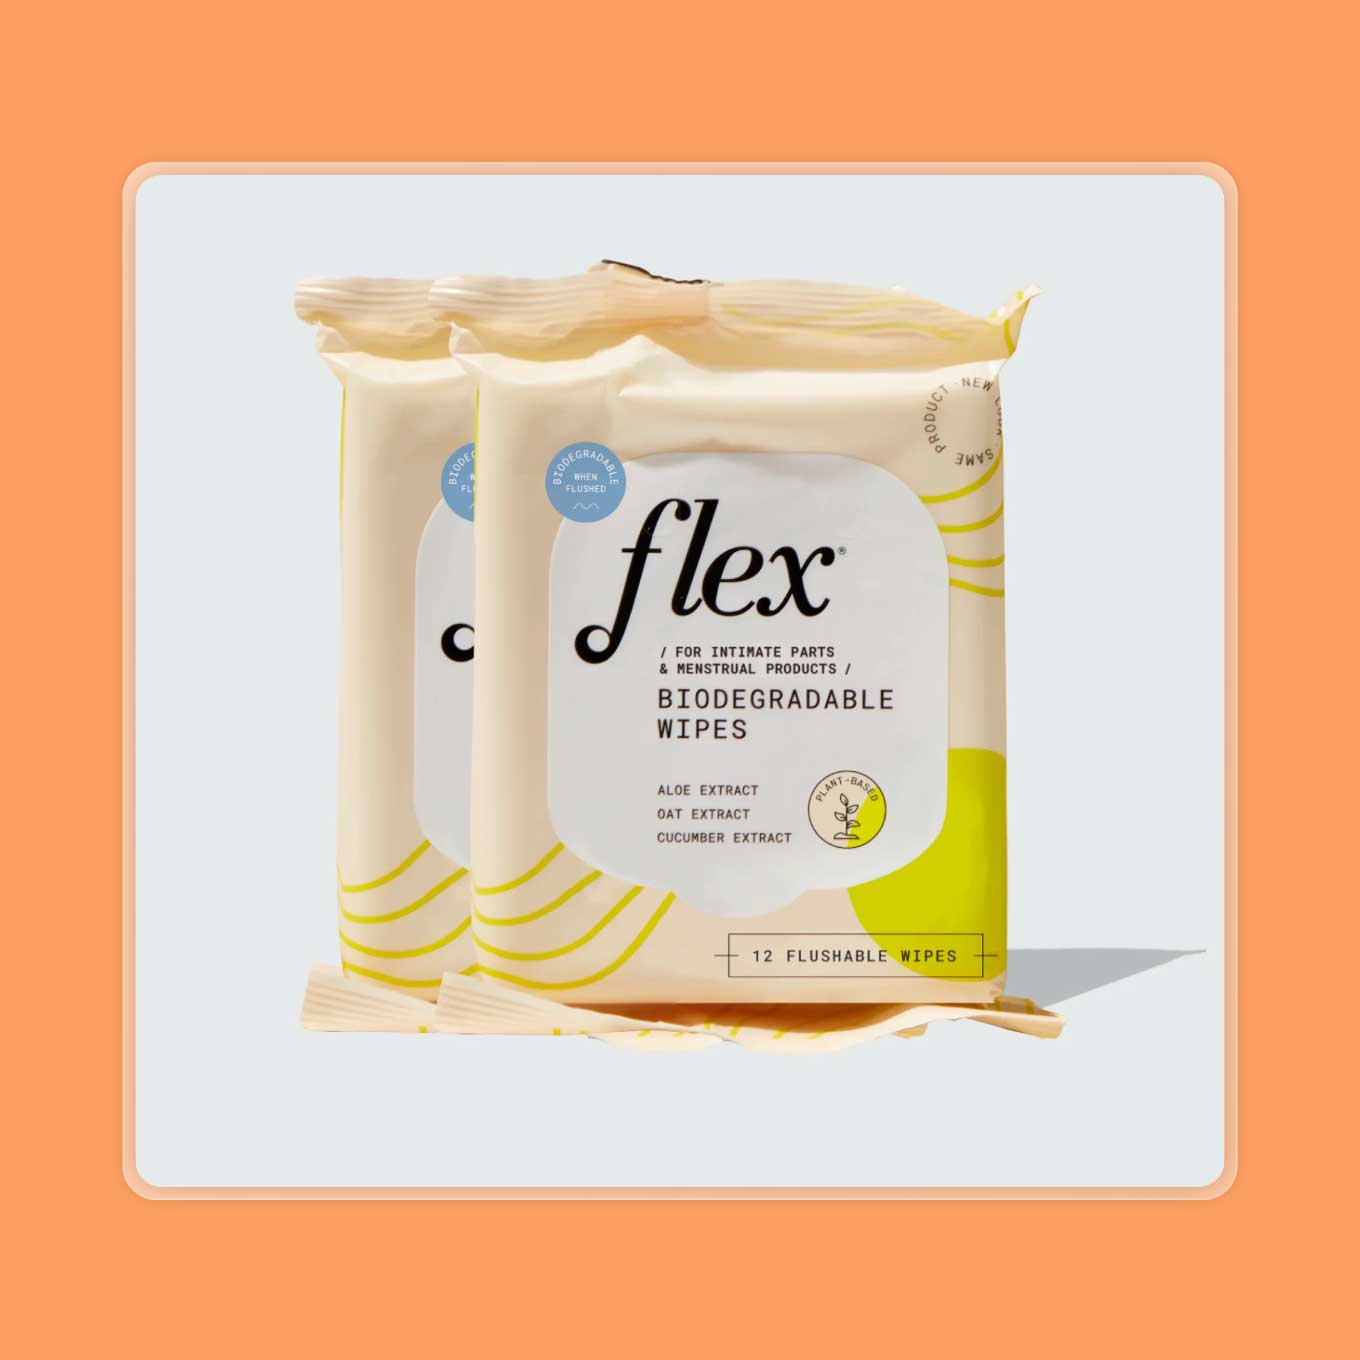 A package of wipes from Flex